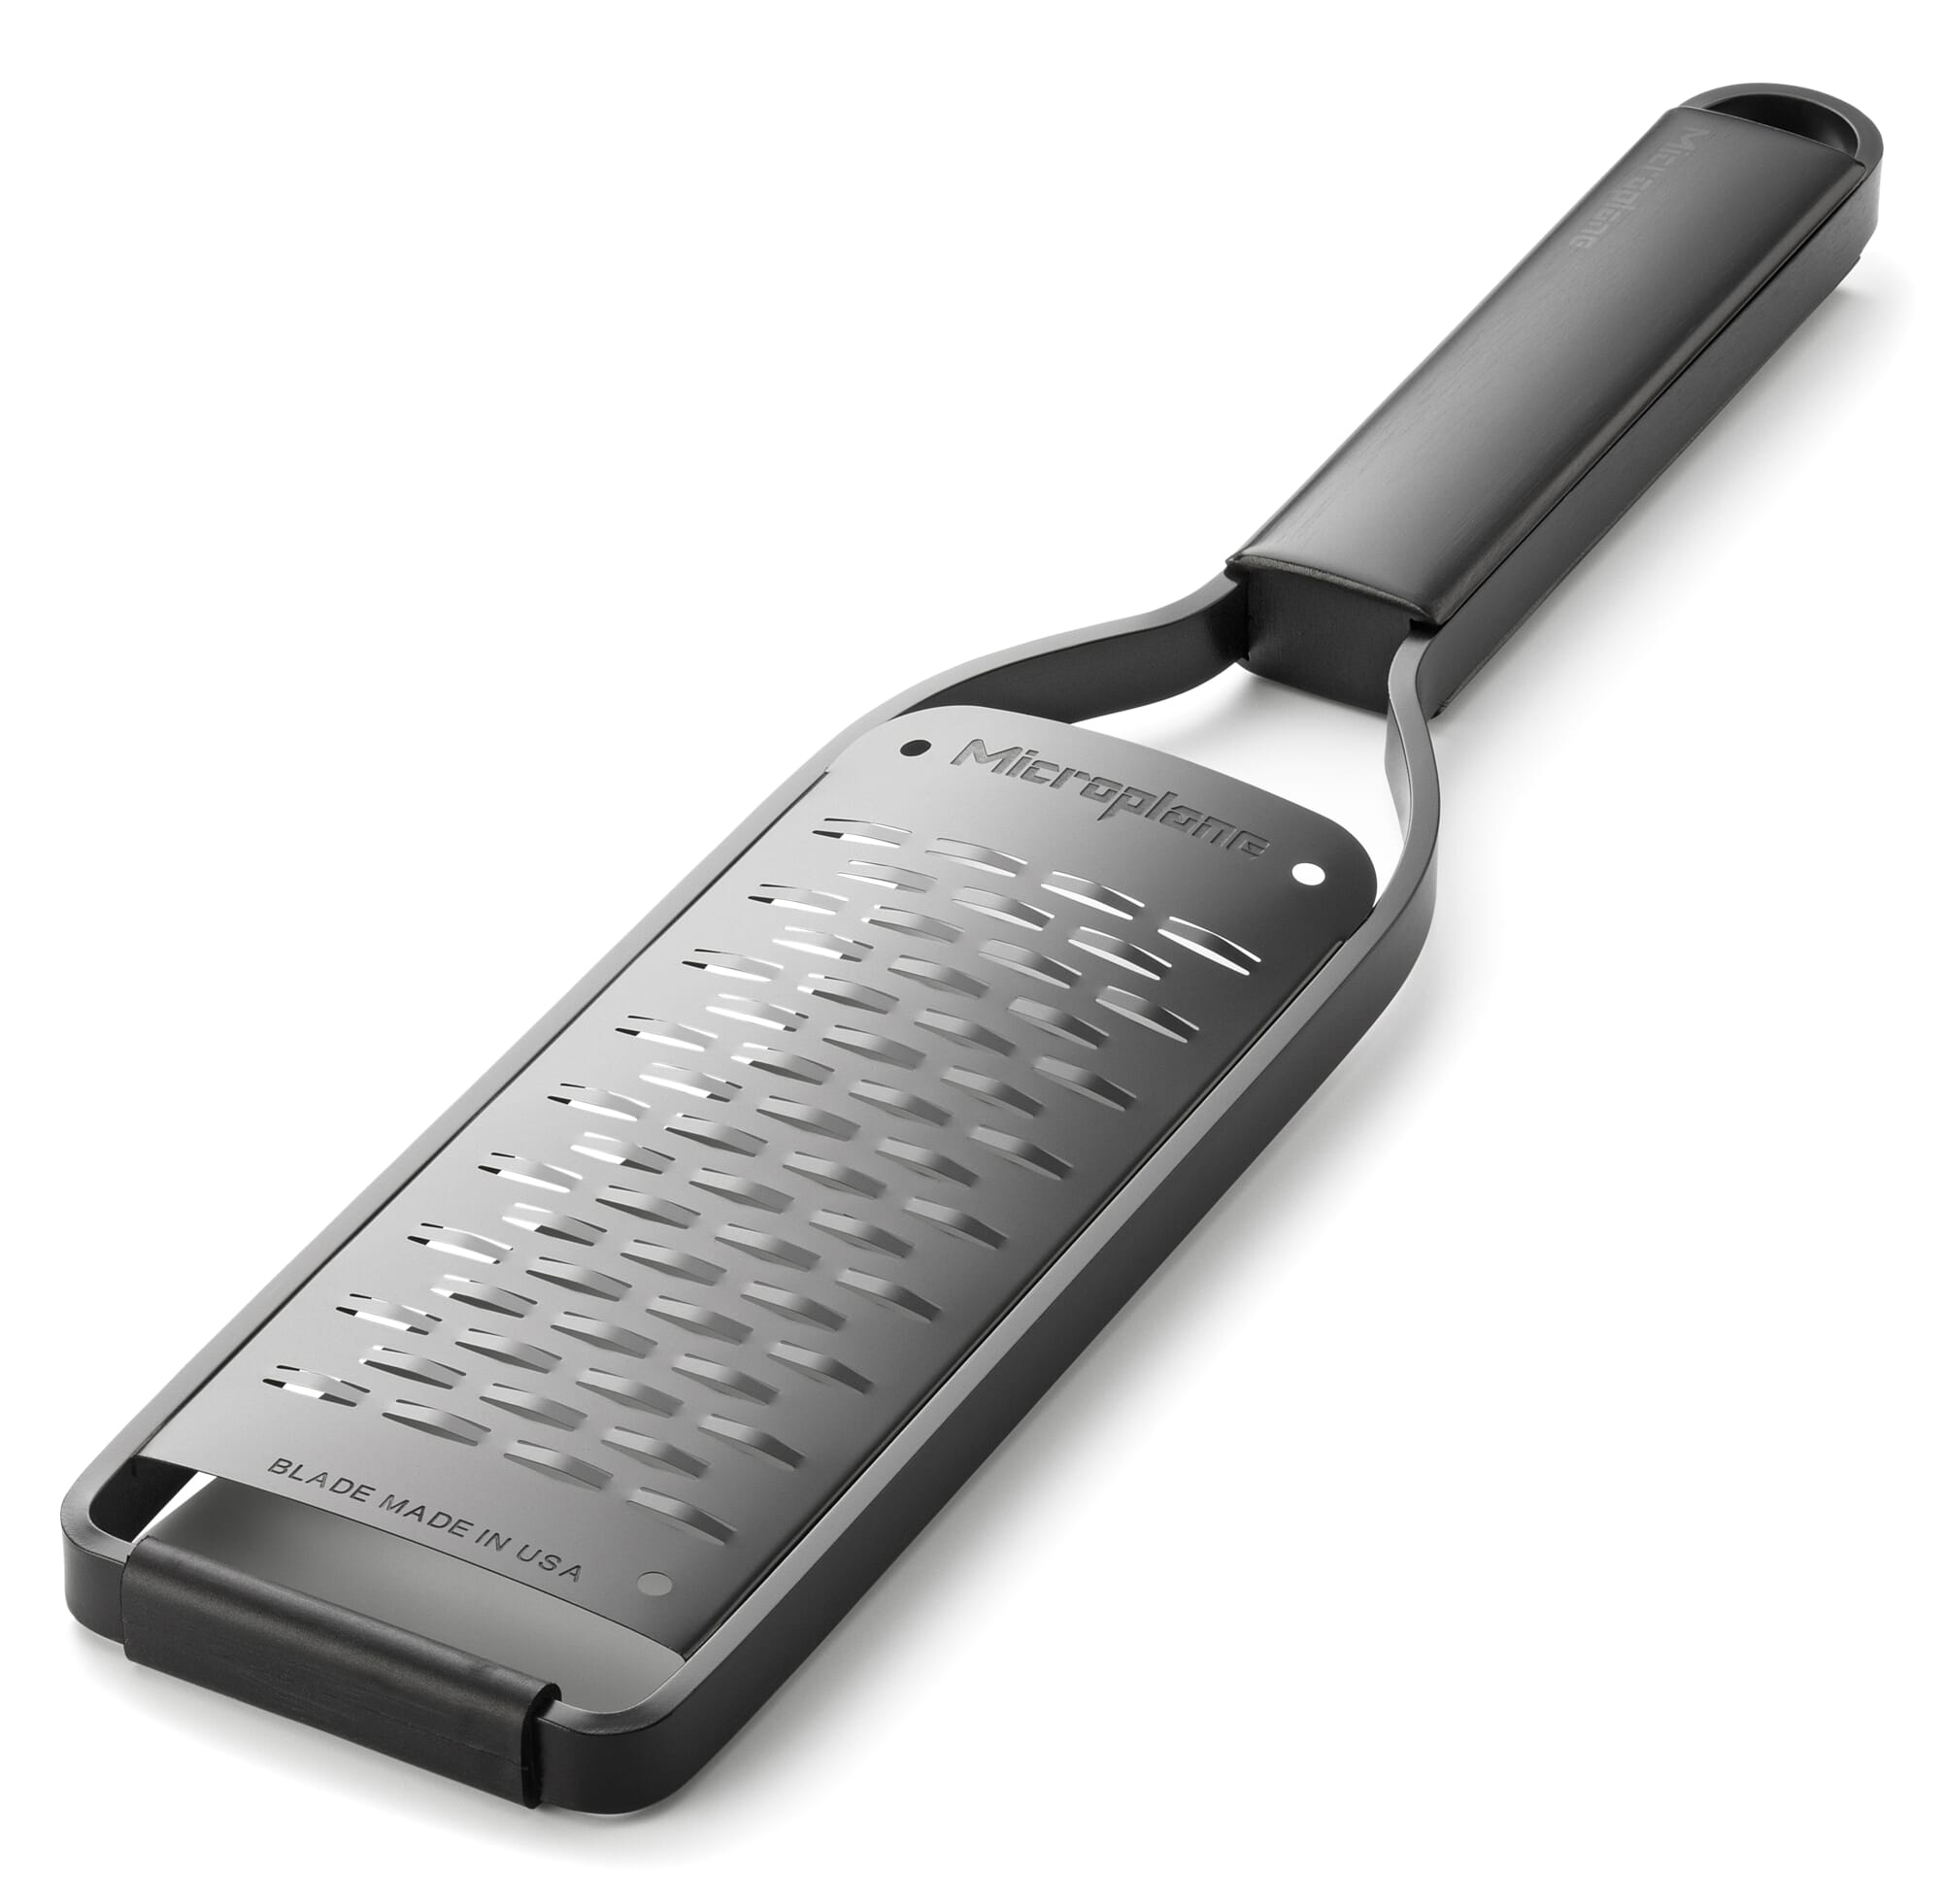 Coarse and Fine Grater Cheese Grater - China Vegetable Grater and Parmesan  Grater price